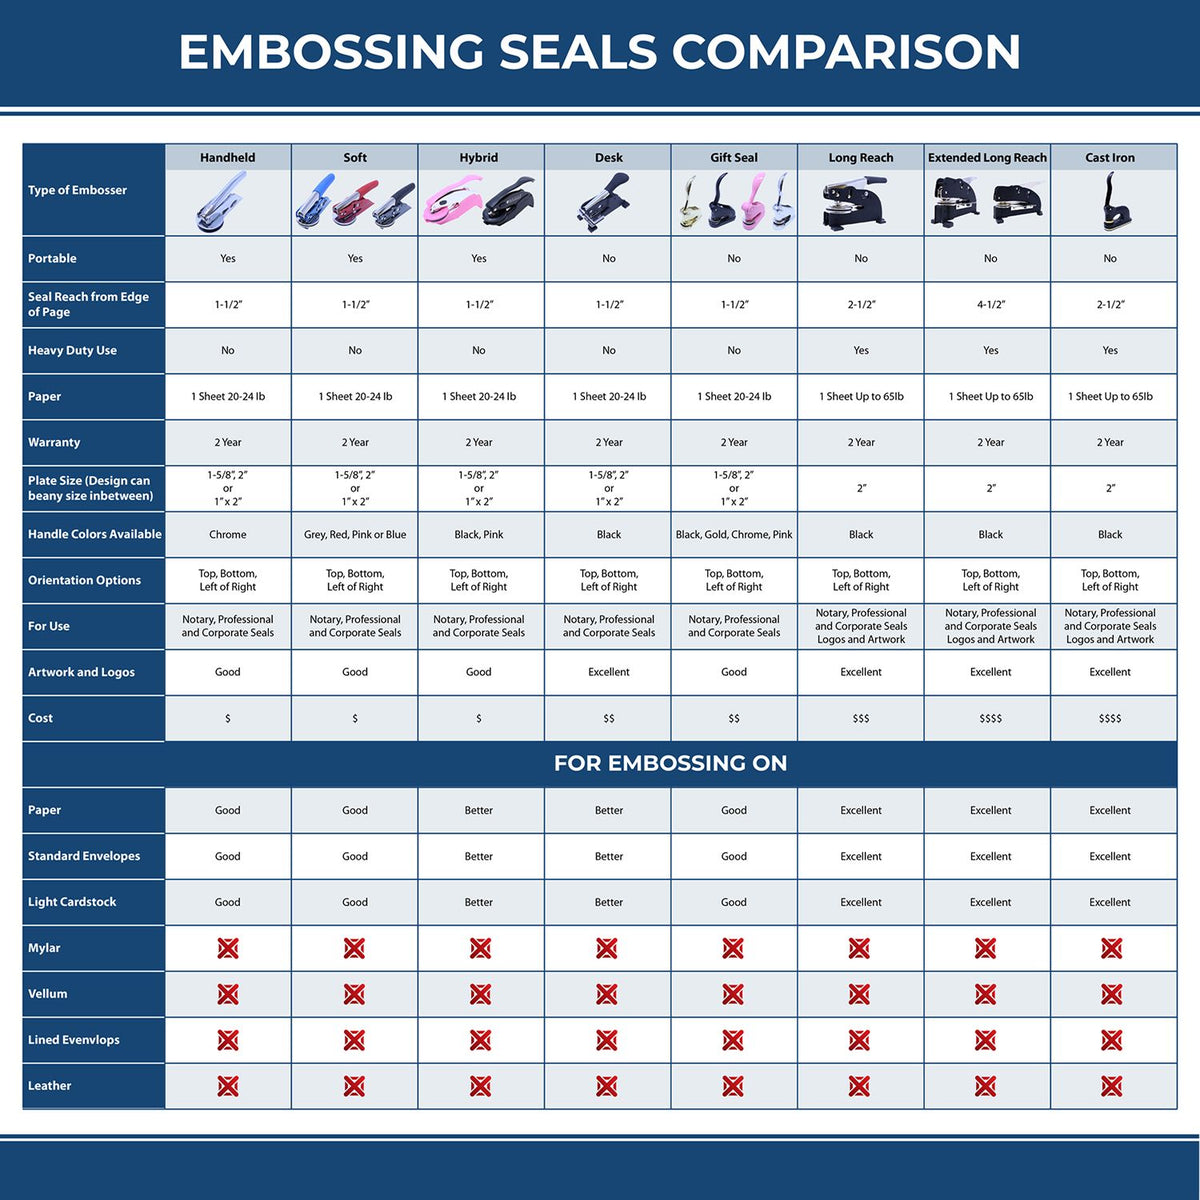 A comparison chart for the different types of mount models available for the State of New Mexico Extended Long Reach Geologist Seal